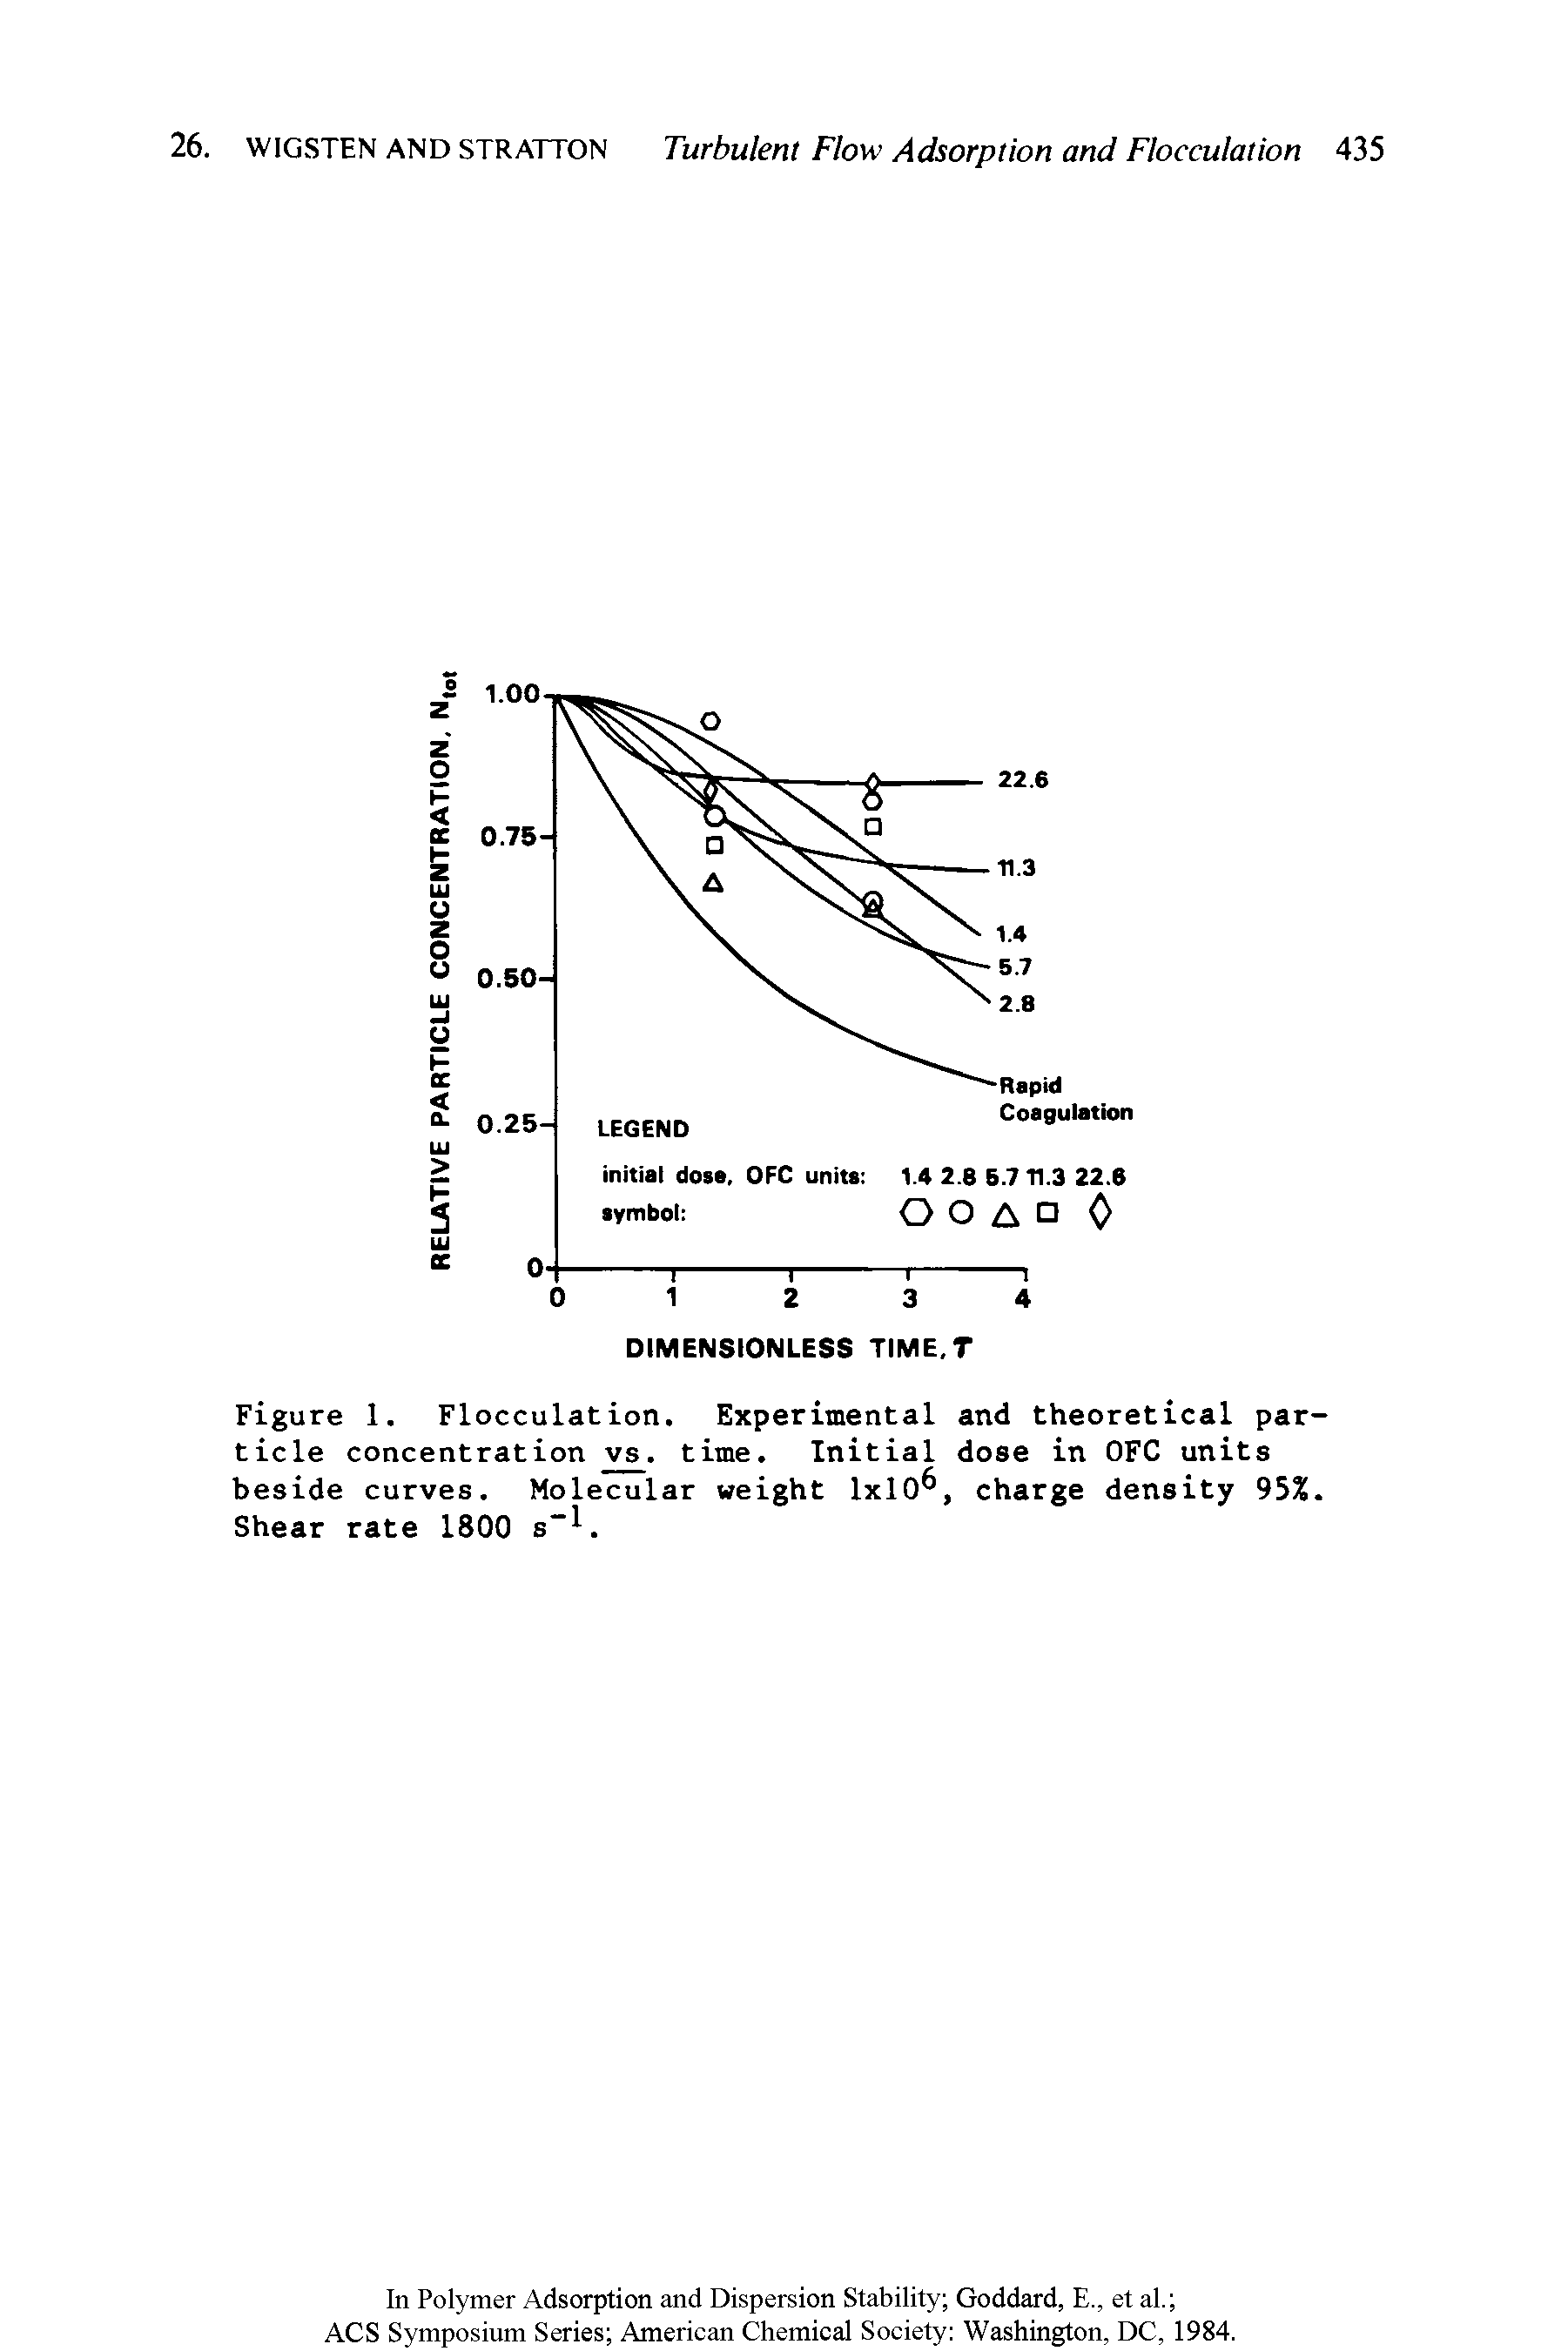 Figure 1. Flocculation. Experimental and theoretical particle concentration vs. time. Initial dose in OFC units beside curves. Molecular weight 1x10, charge density 95%. Shear rate 1800 s-. ...